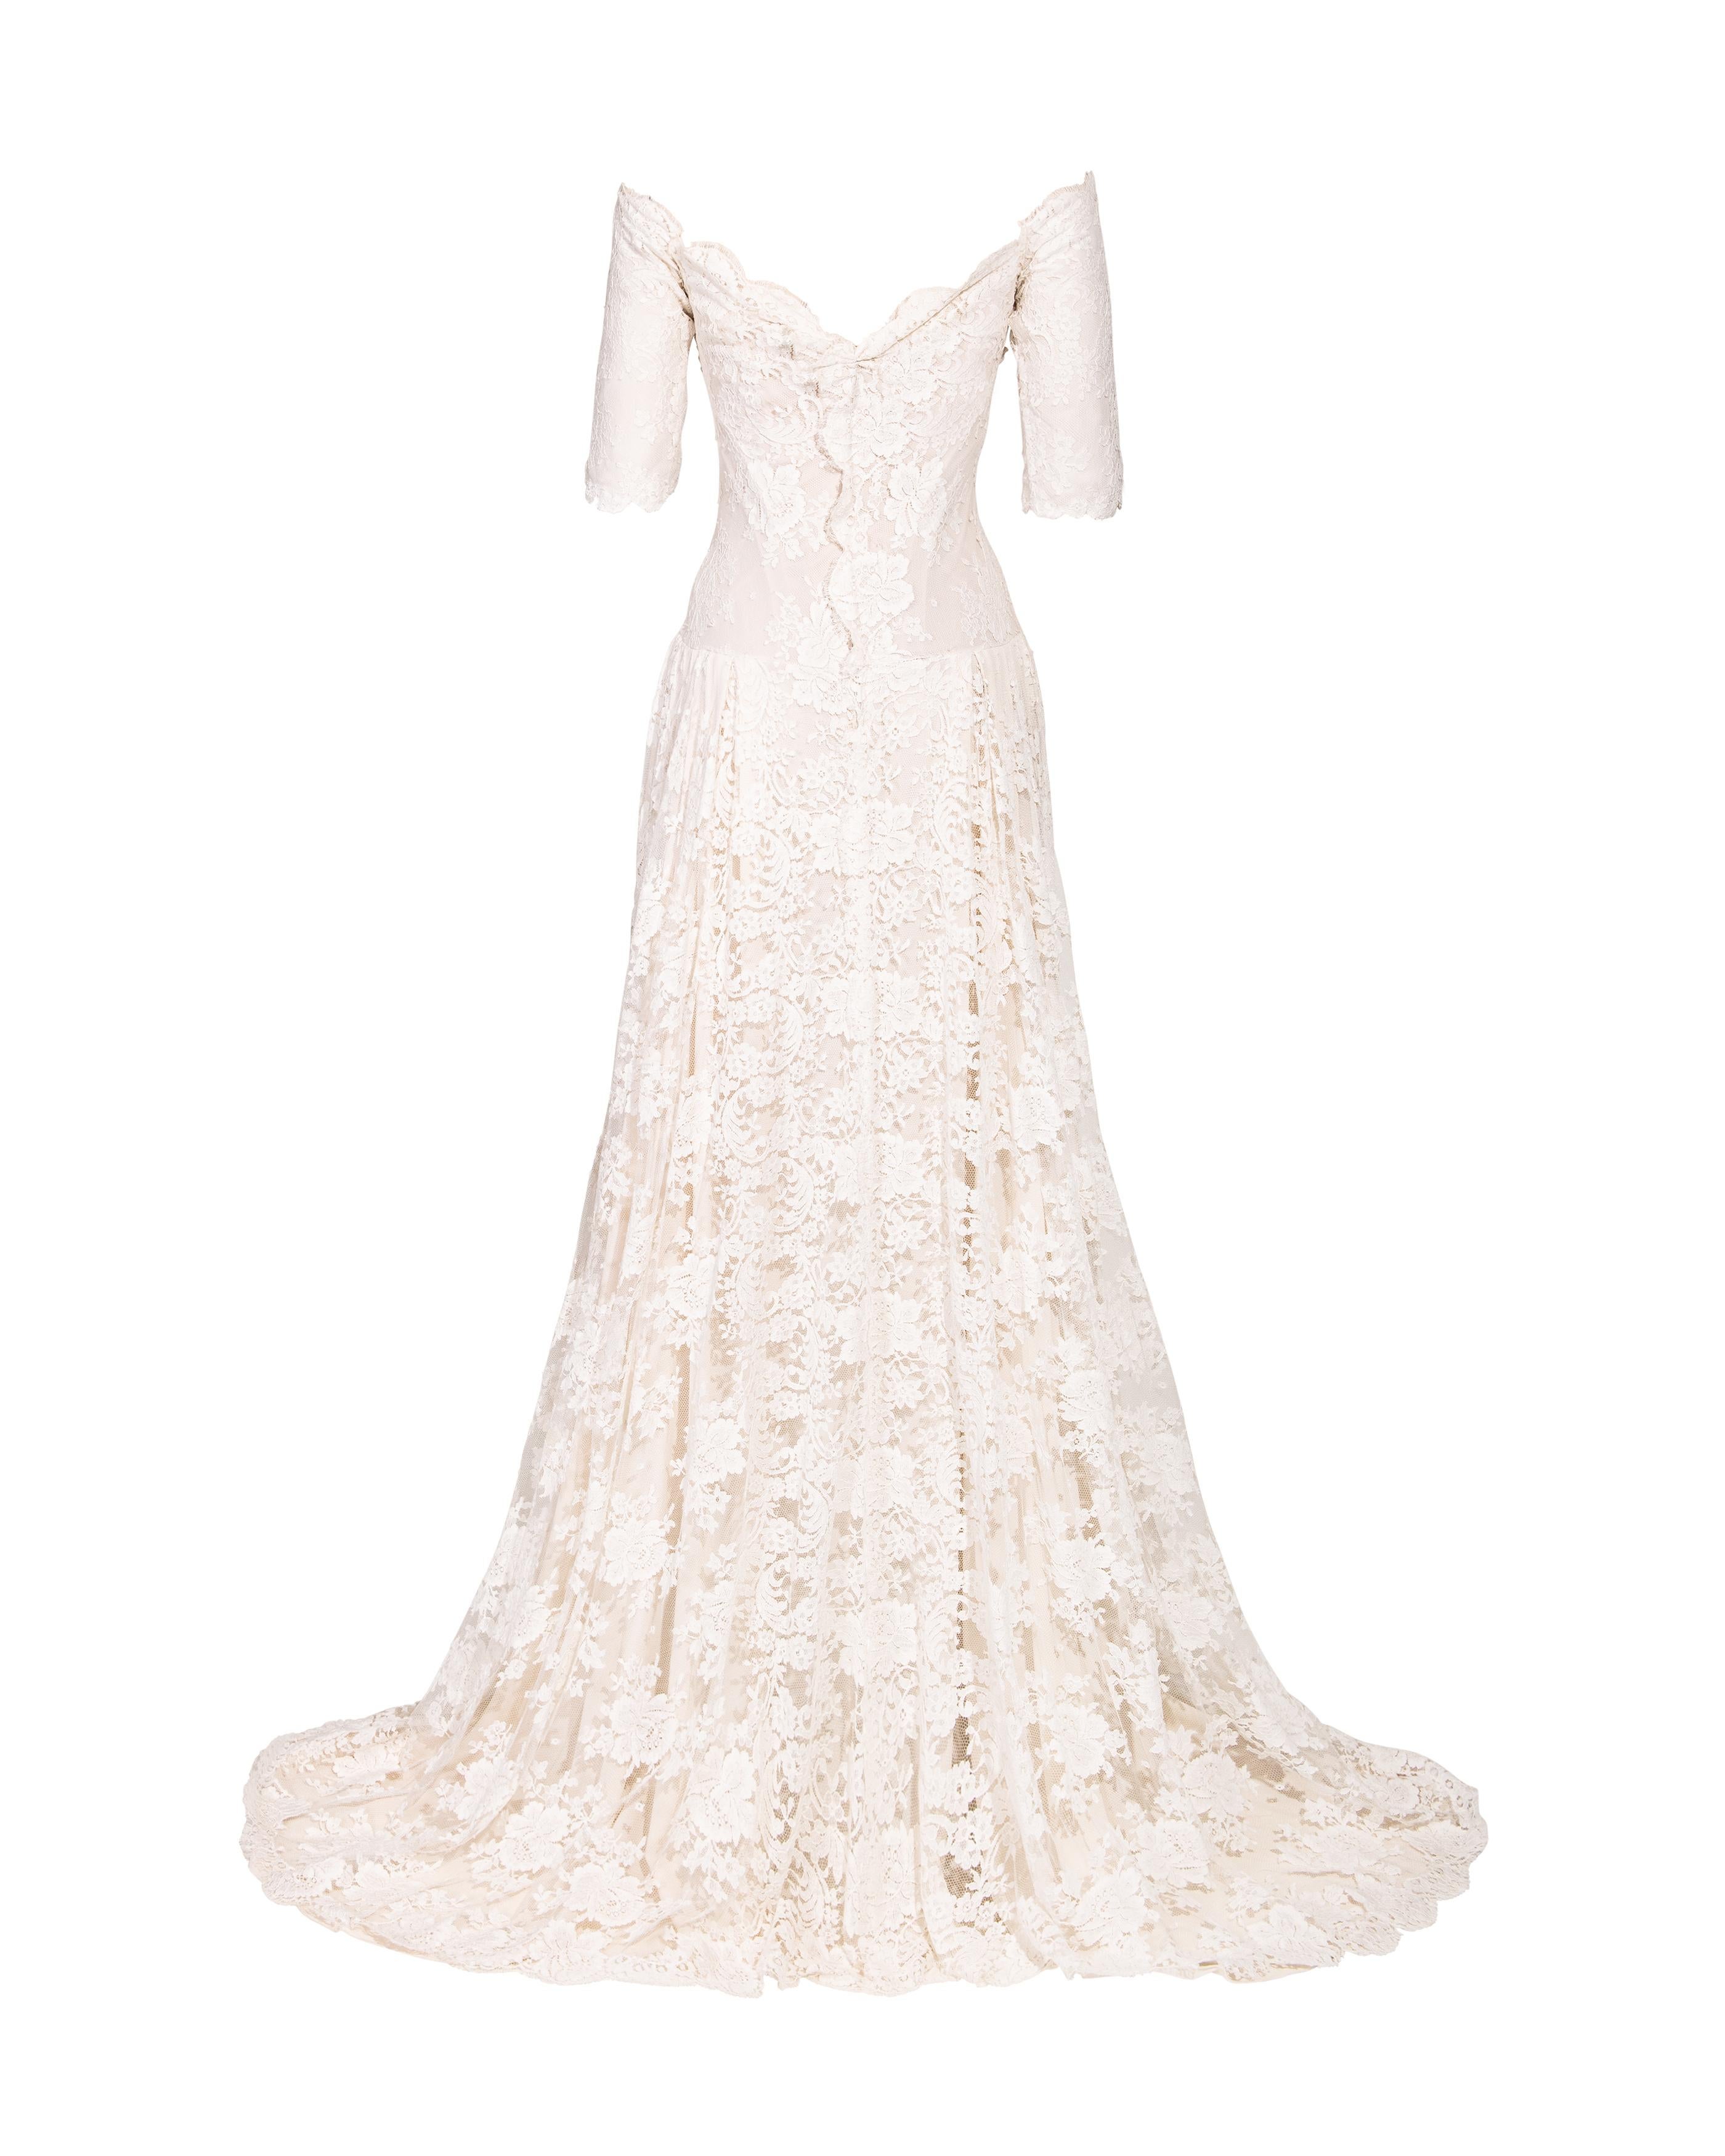 S/S 2007 Alexander McQueen (Lifetime) White Lace Off-Shoulder Gown with Train For Sale 1